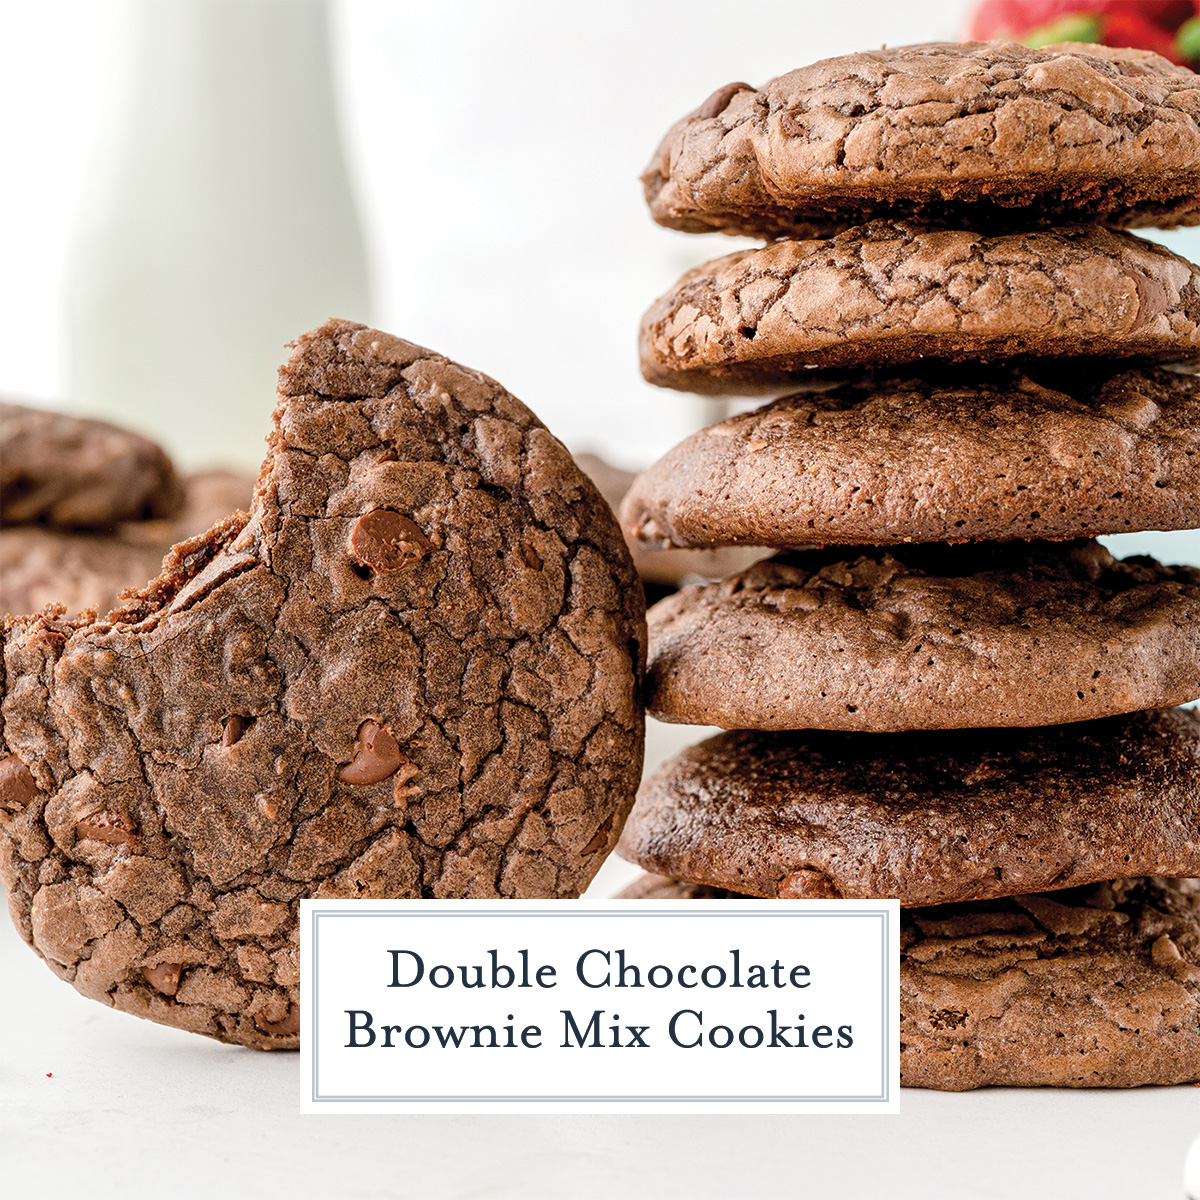 chocolate brownie mix cookies with text overlay